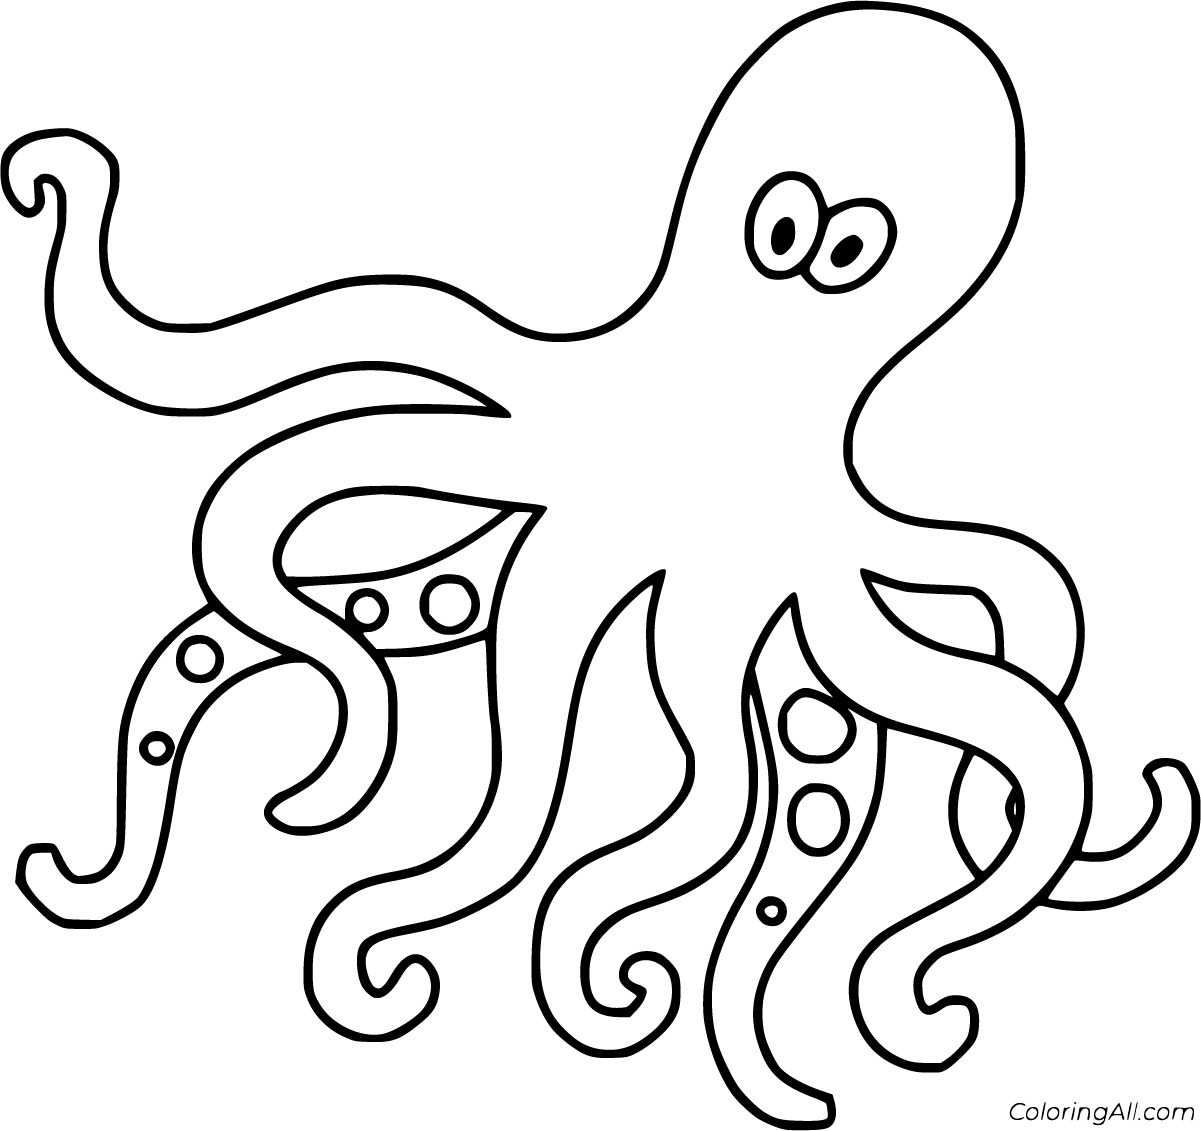 Octopus Coloring Pages (37 Free Printables) - ColoringAll